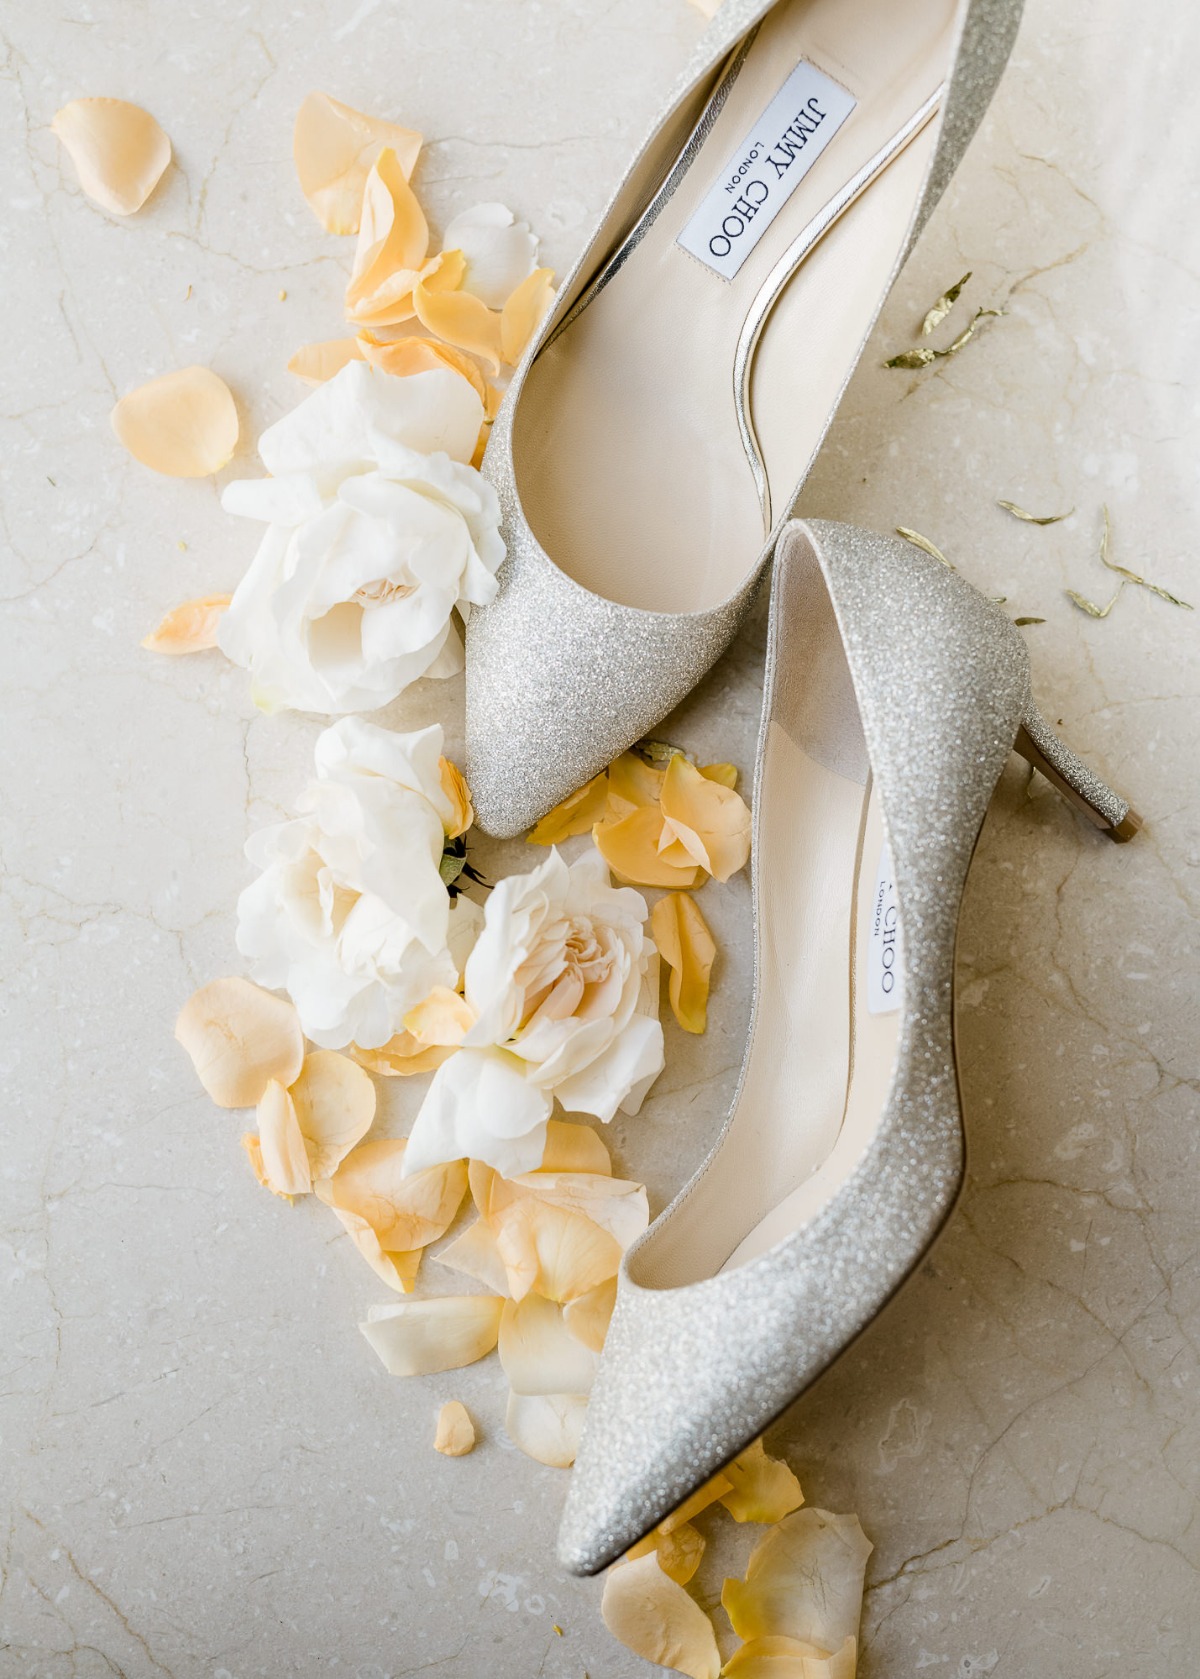 Jimmy Choo silver sparkly wedding shoes